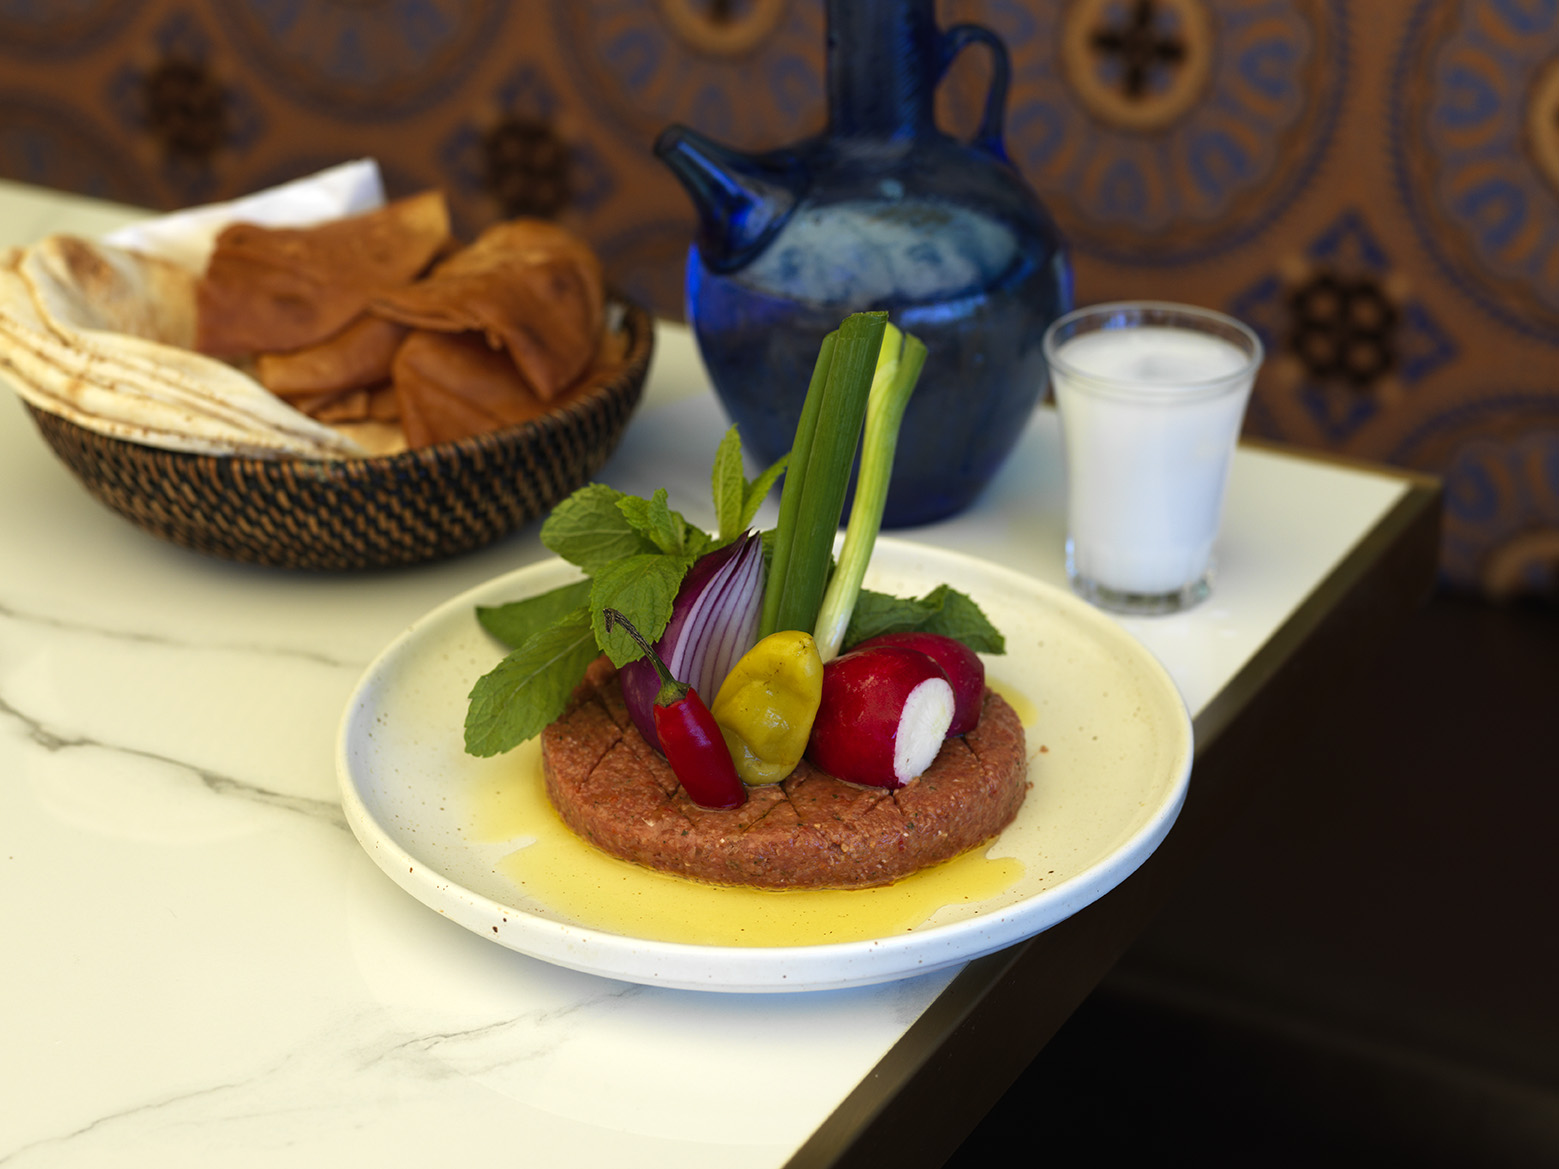 Lamb kibbe nayya - rumoured to be an aphrodisiac and perfect washed down with a glass of Arak.